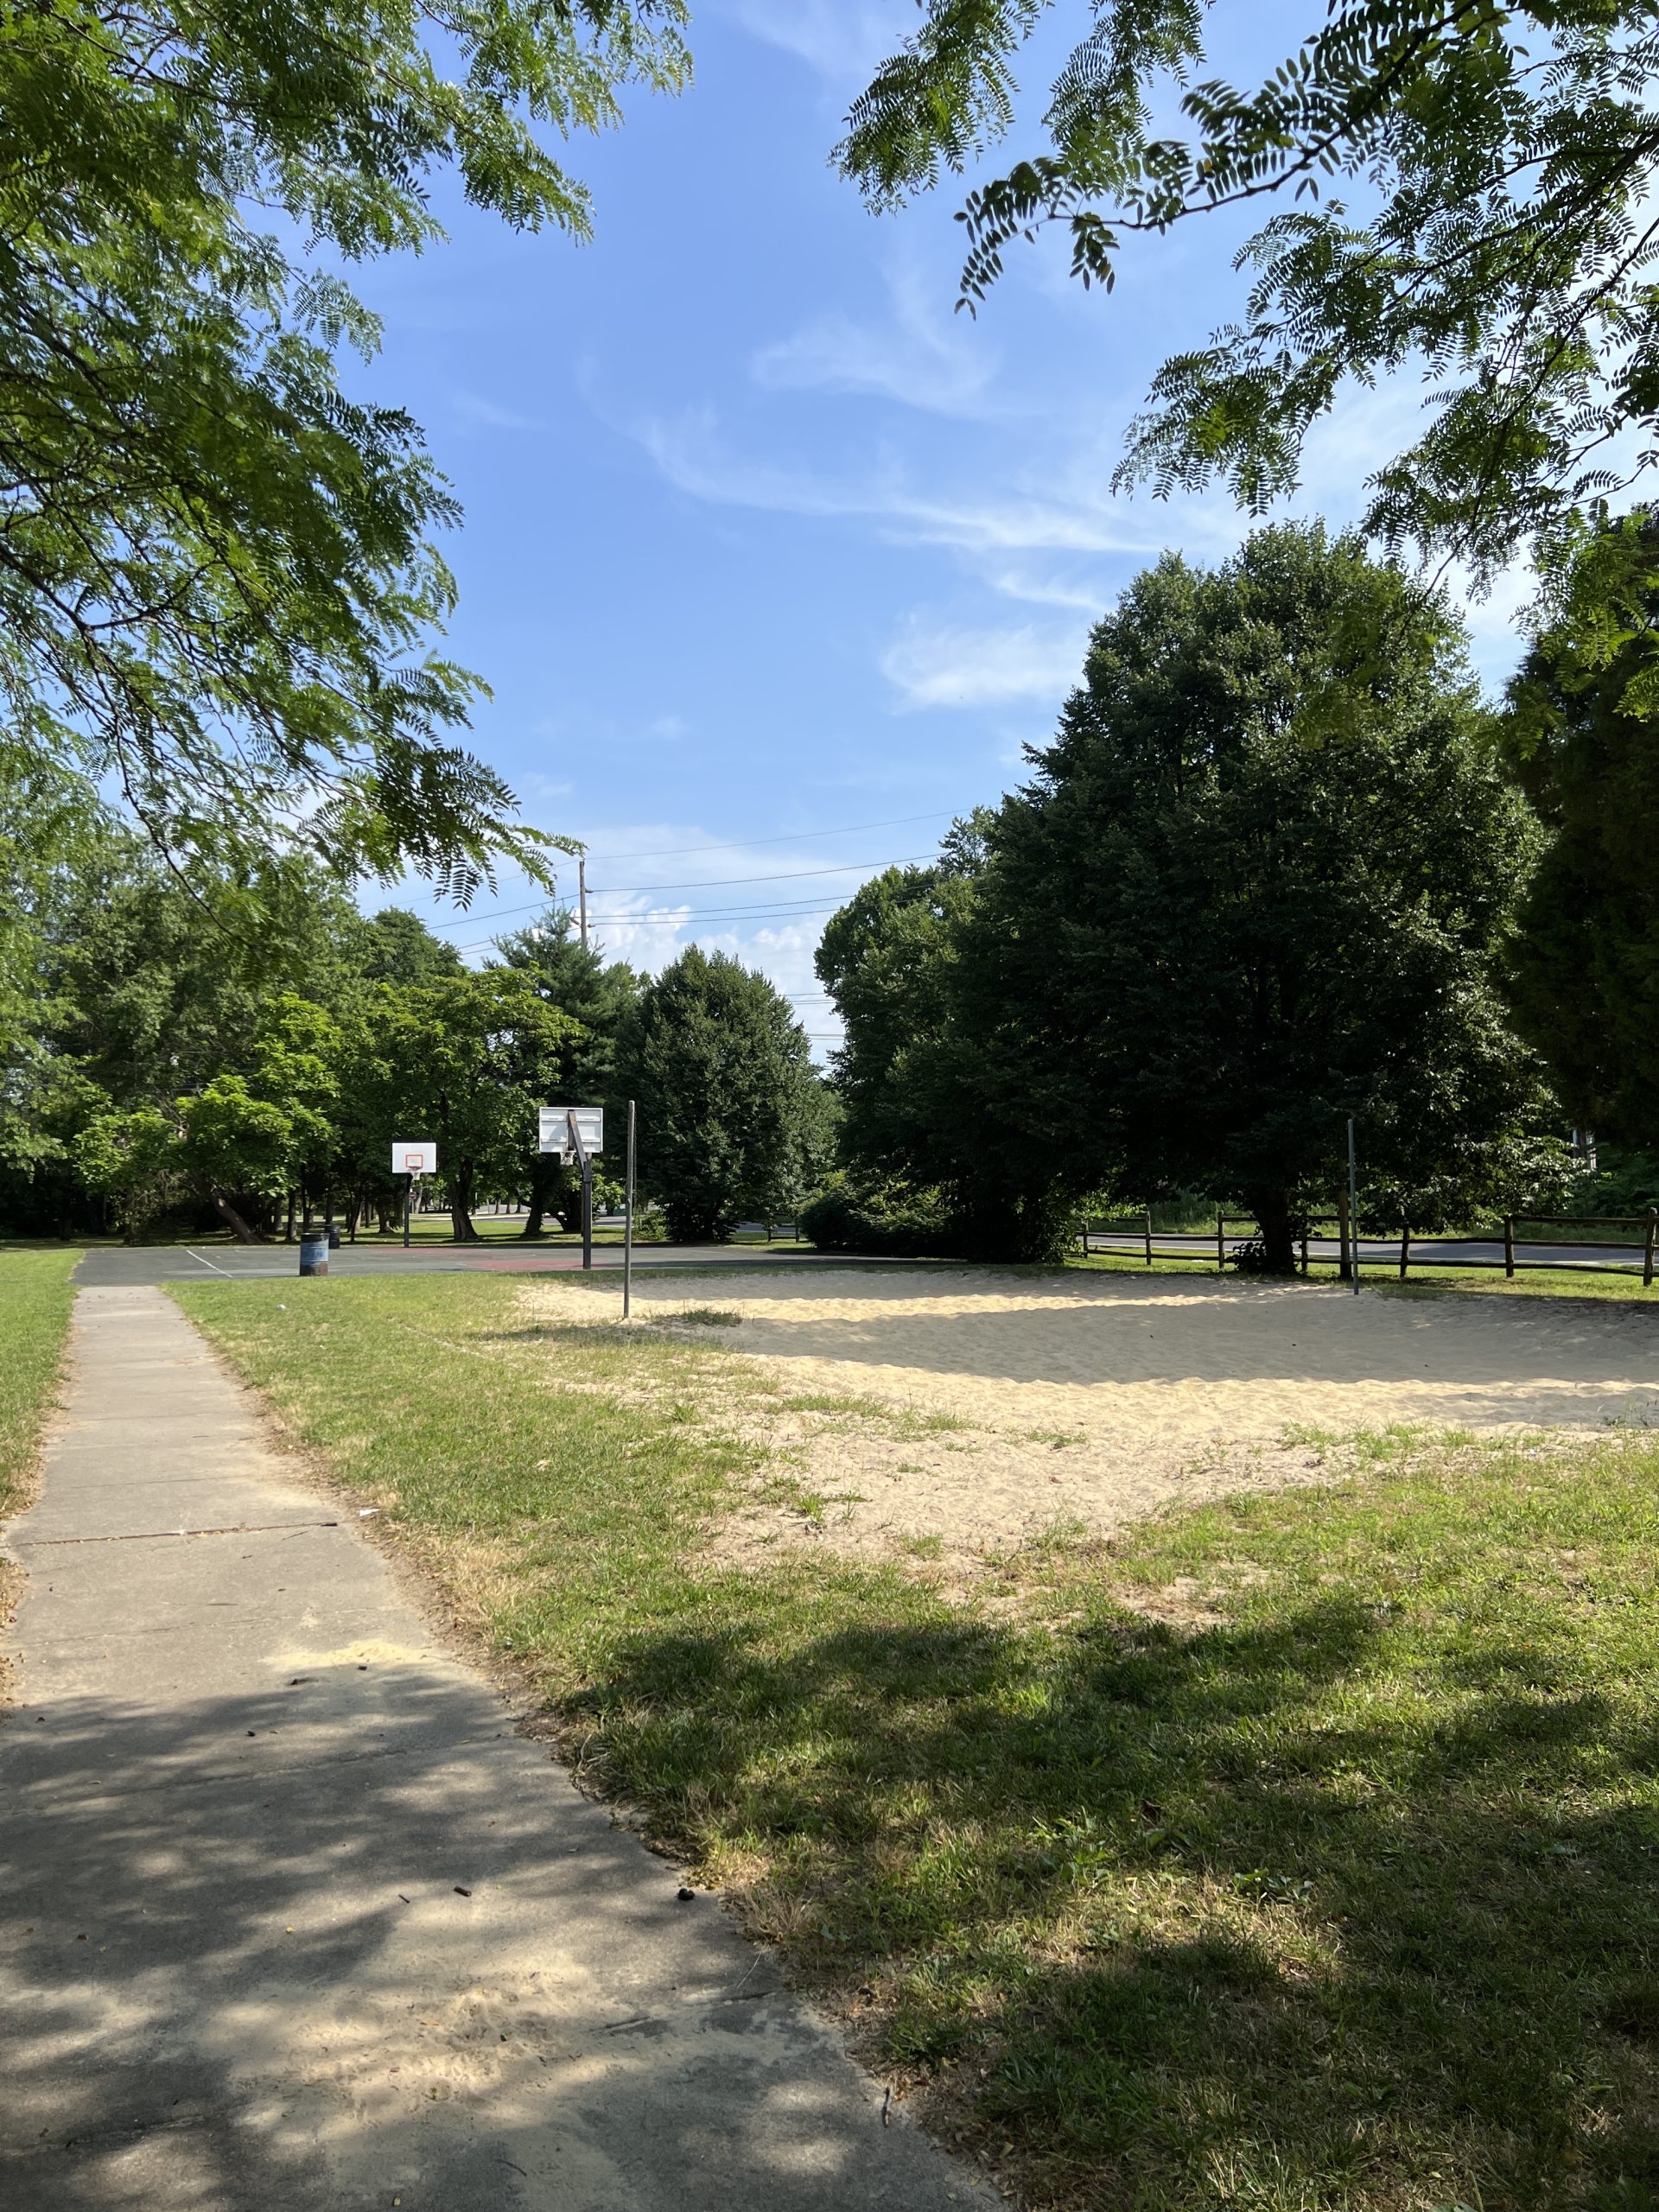 Berlin Park Basketball courts and sand volleyball courts in Berlin New Jersey vertical